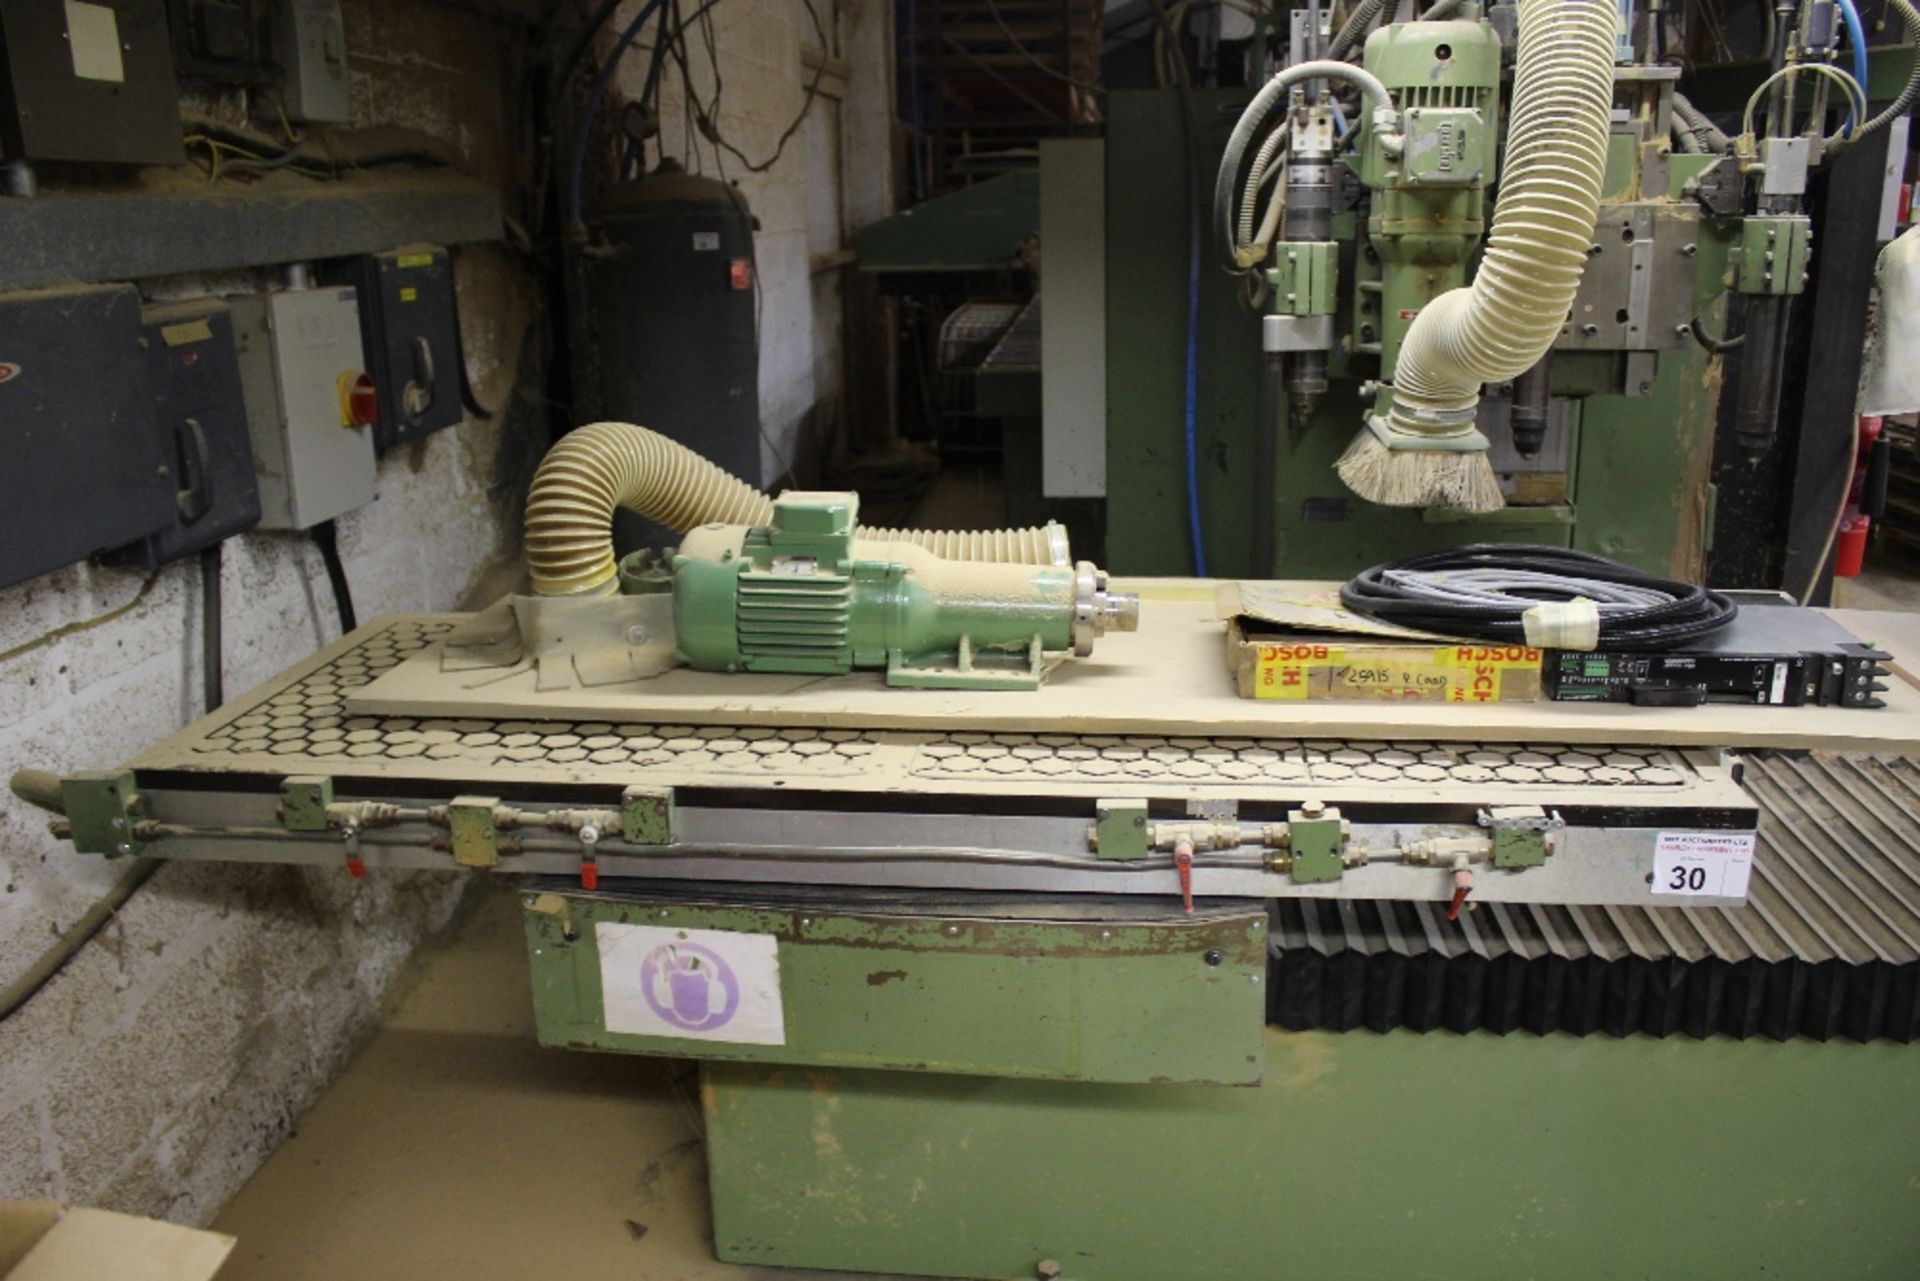 1 Rye CNC Router model MT1600 fitted with Matrix table, 2 Perske Heads, 3 air drills, 1 Rietschle - Image 2 of 12